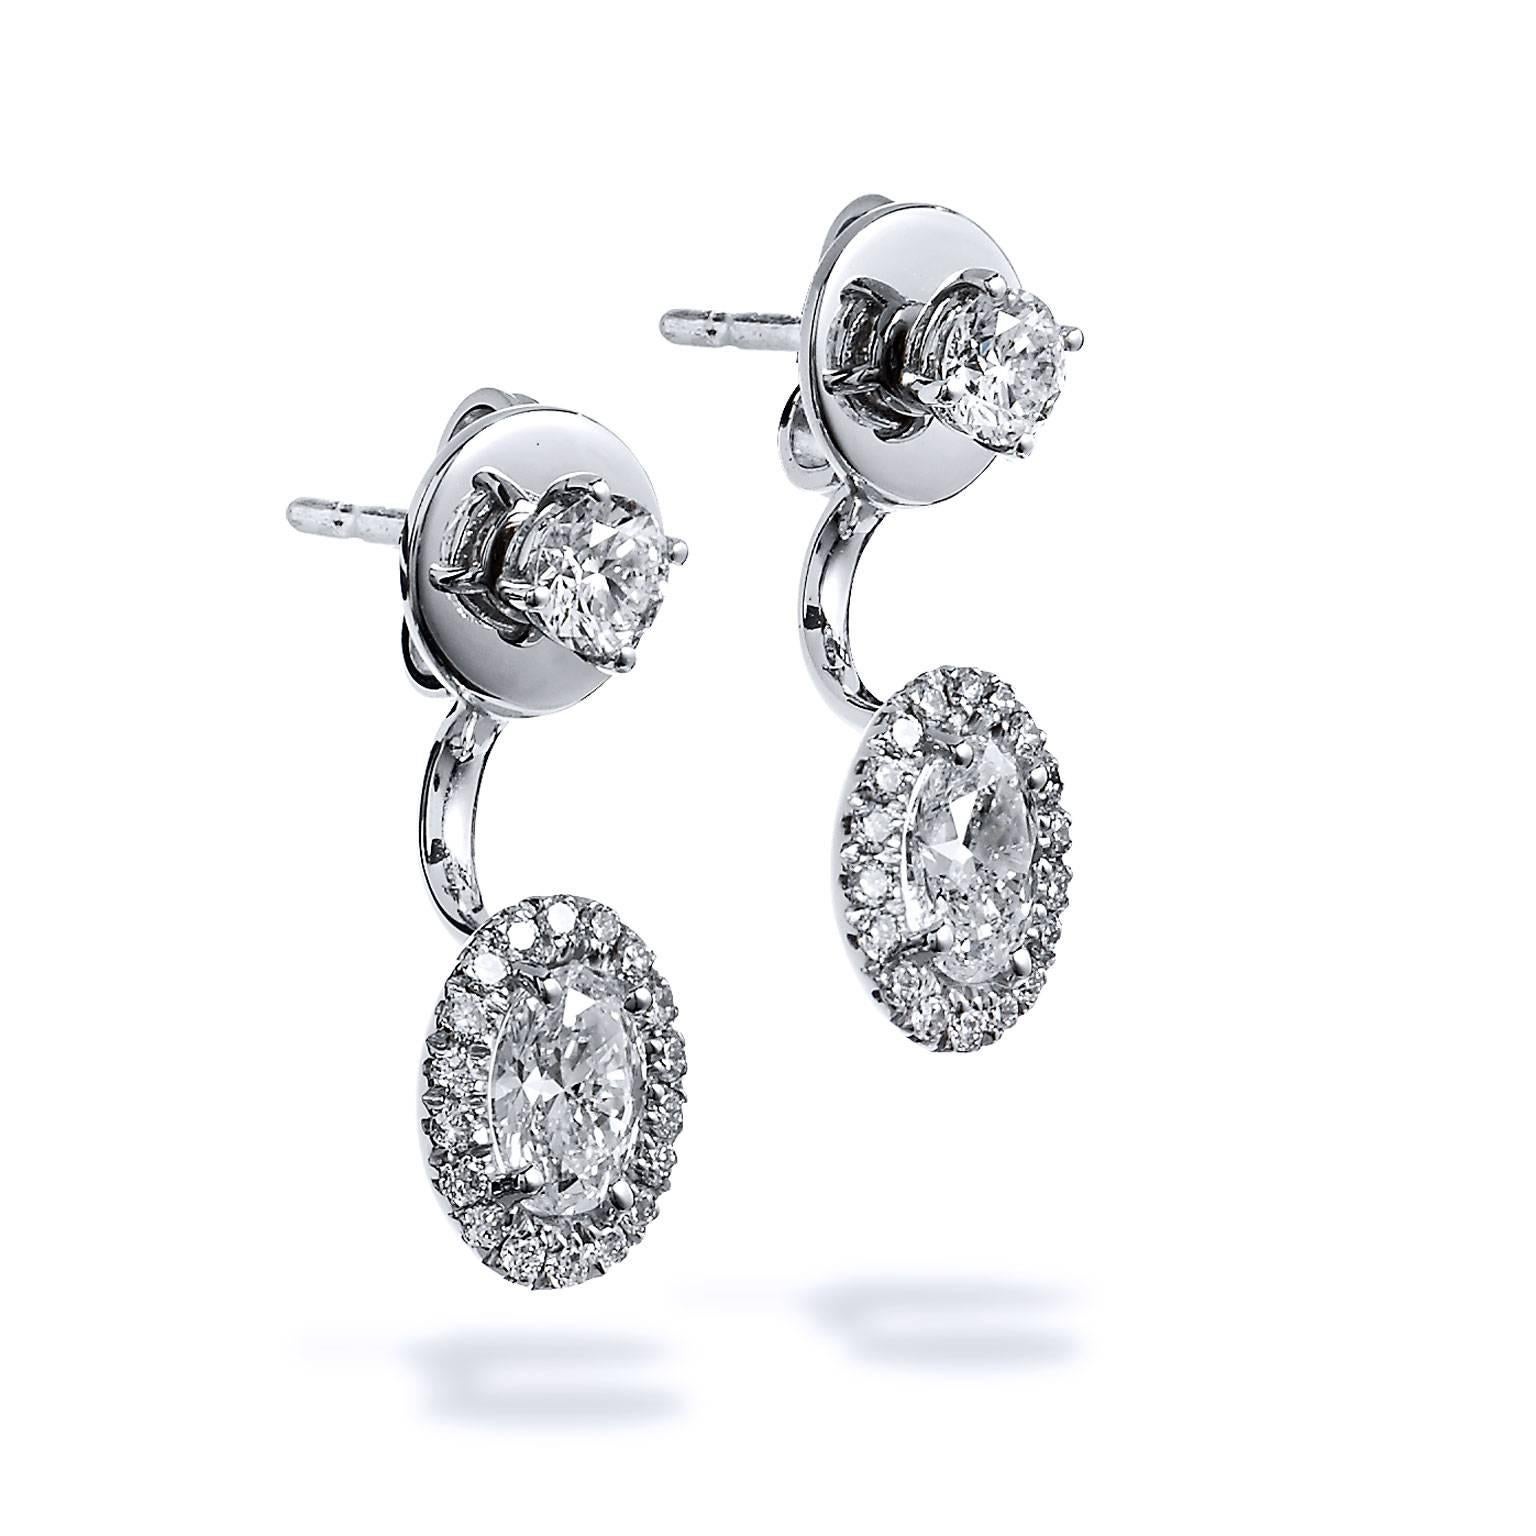 18 karat white gold double-sided stud earrings featuring a total weight of 1.39 carat of diamond. 0.79 carat of oval diamond (F/VS2) is set at center and accompanied by 0.60 carat in pave diamond (G/SI1).